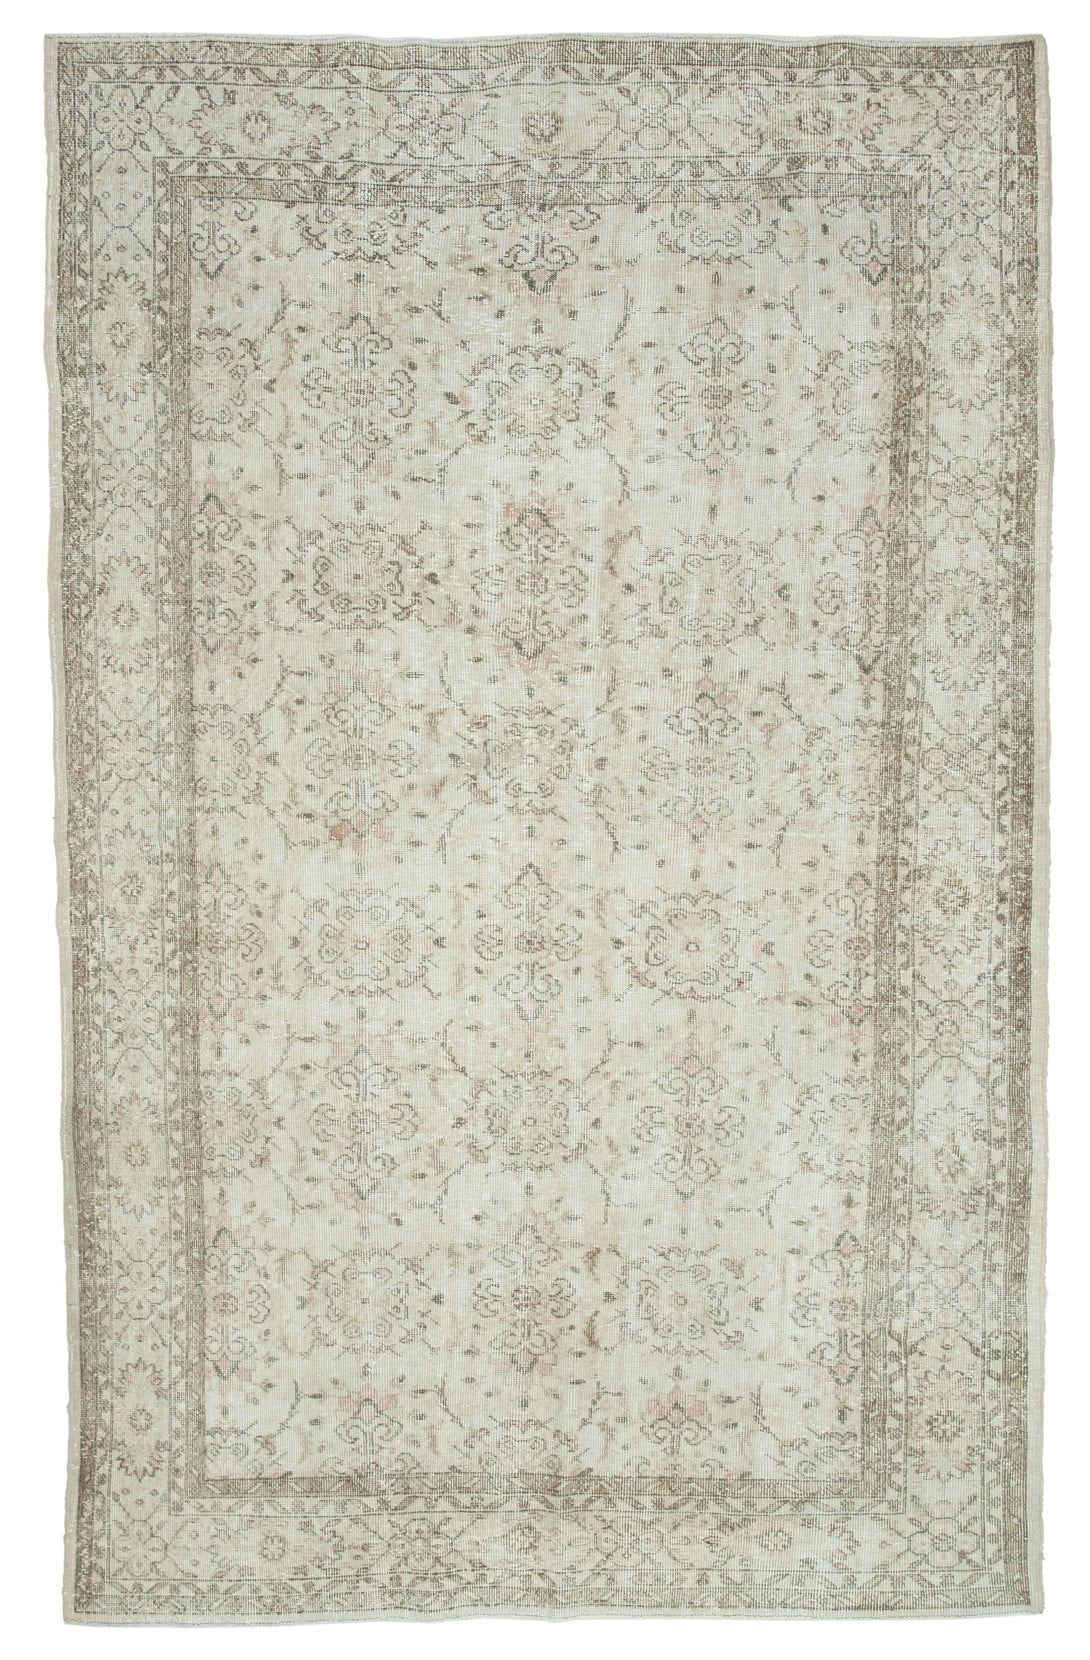 Handmade White Wash Area Rug > Design# OL-AC-24988 > Size: 6'-5" x 10'-5", Carpet Culture Rugs, Handmade Rugs, NYC Rugs, New Rugs, Shop Rugs, Rug Store, Outlet Rugs, SoHo Rugs, Rugs in USA